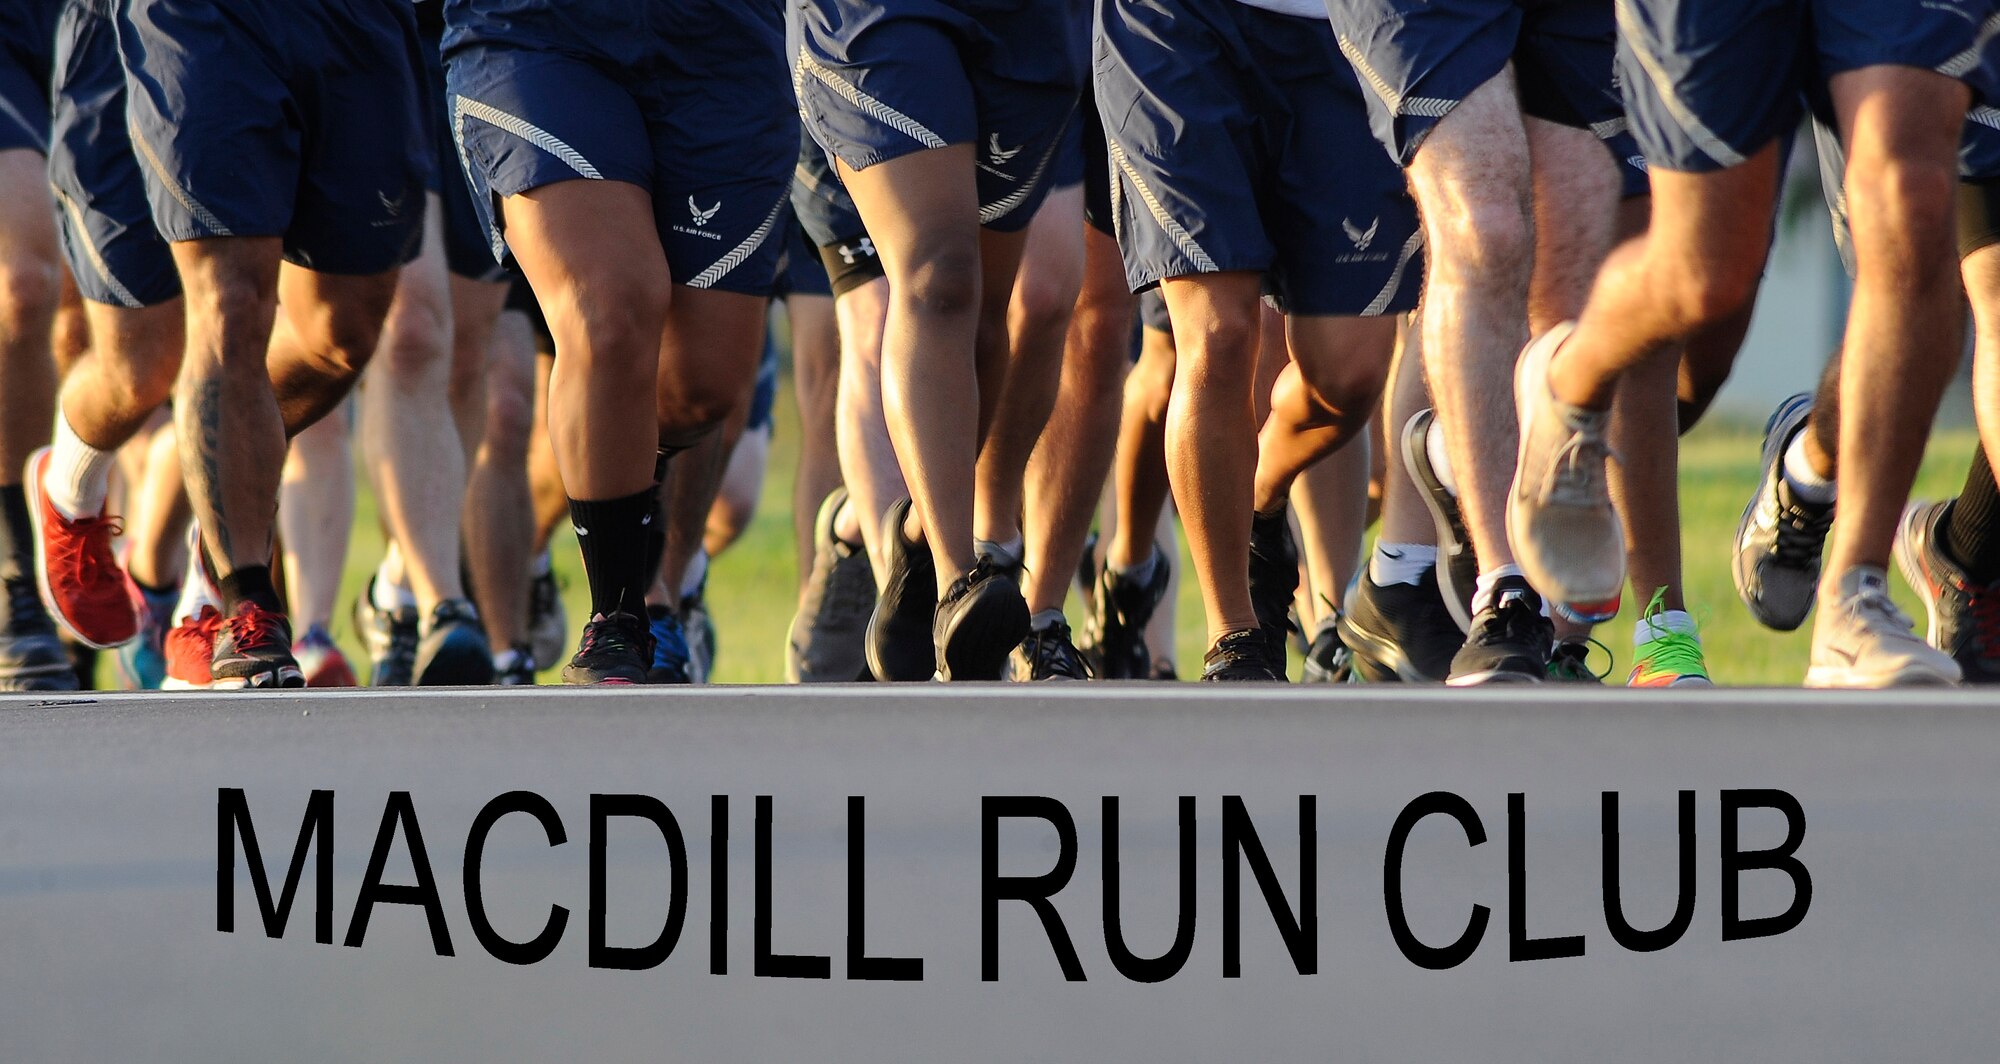 Airman 1st Class Christian Cardwell, an executive administrative assistant with the 6th Mission Support Group, created the MacDill Run Club during his tenure as dorm council president. The MacDill Run Club is held on the second to last or last Friday of every month. (U.S. Air Force graphic by Senior Airman Tori Schultz)